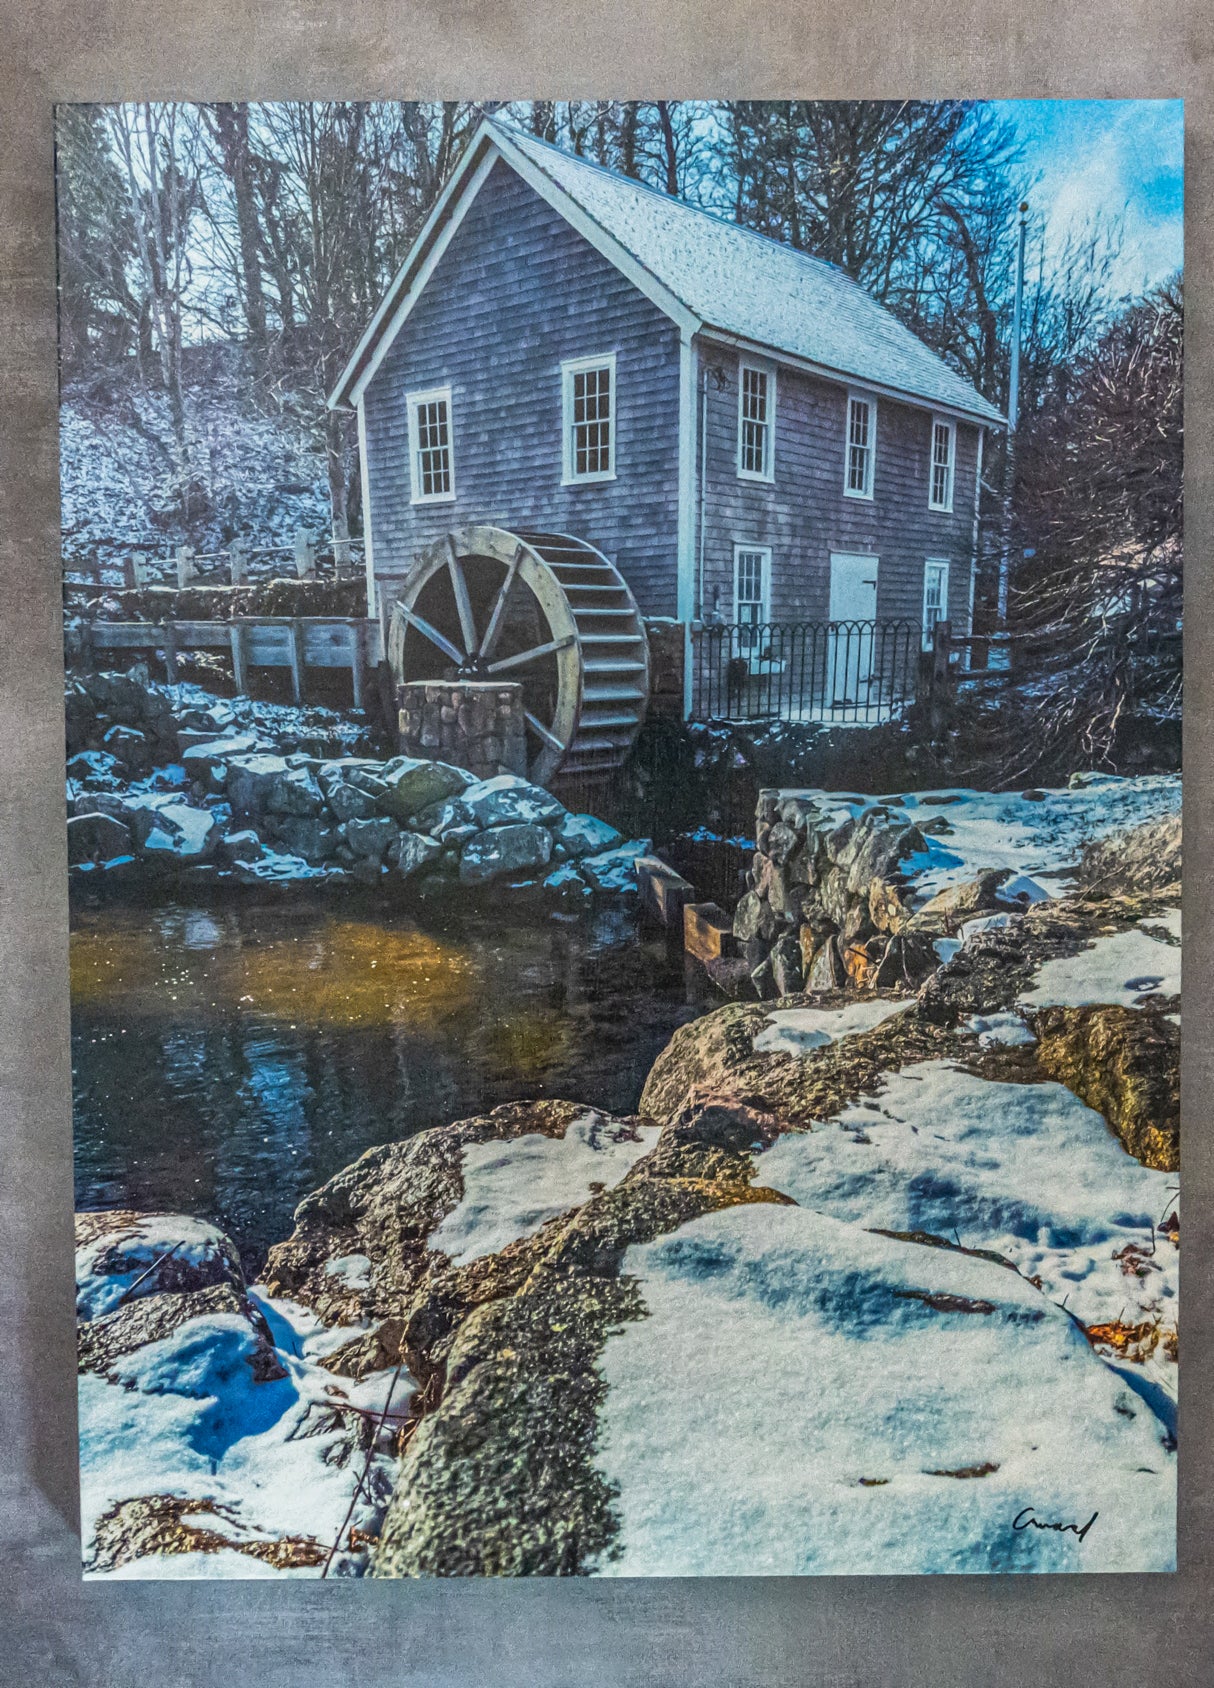 18x24 Gallery Wrapped Canvas of Stony Brook Gristmill in Brewster - Cape Cod.